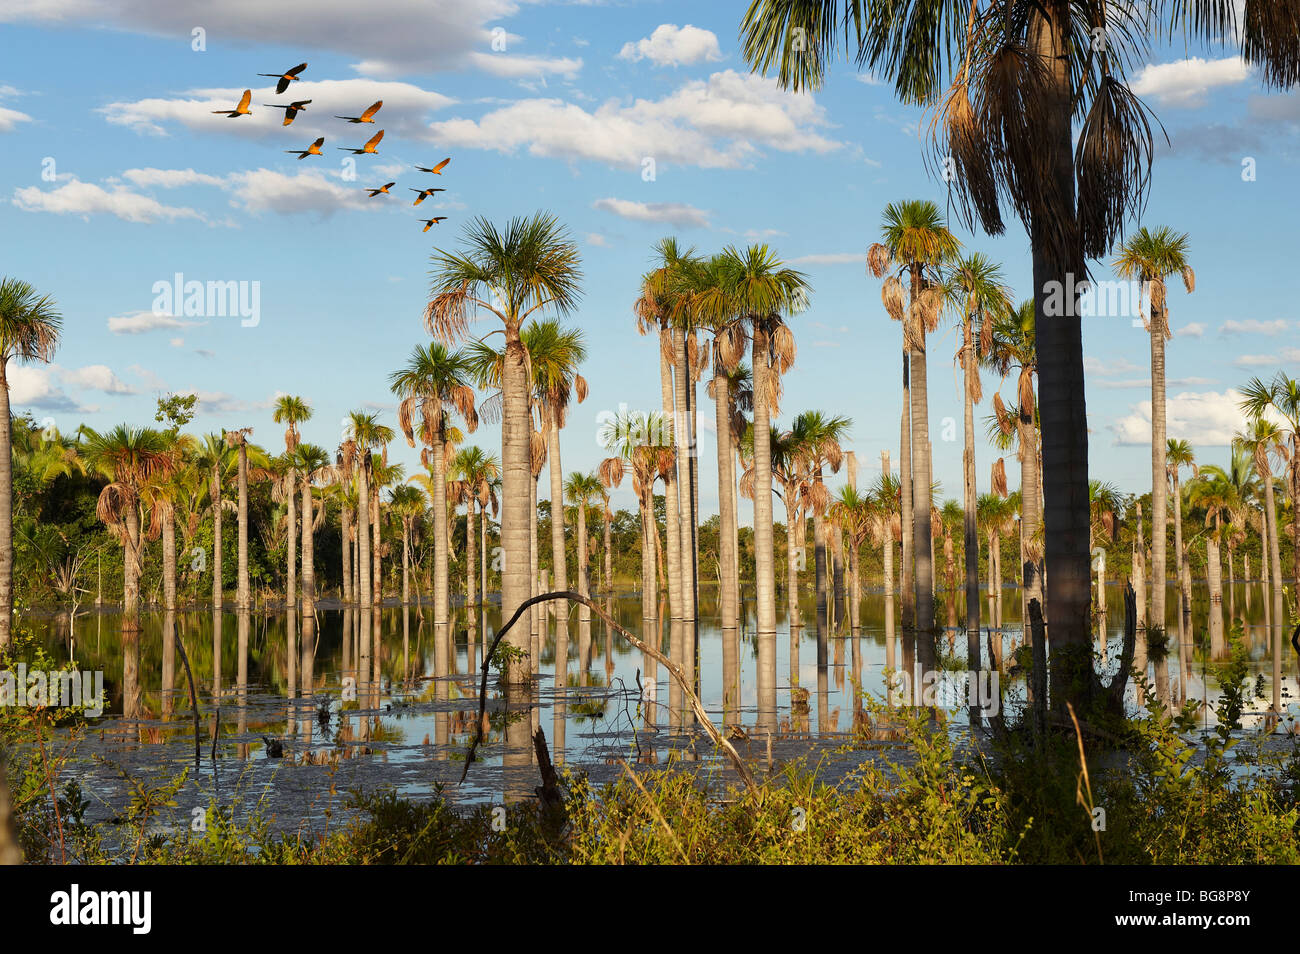 wetlands with palms at Amazon forest and flying BLUE-AND-YELLOW MACAWS, NOBRES, Bom Jardim, MATO GROSSO, Brasil, South America Stock Photo